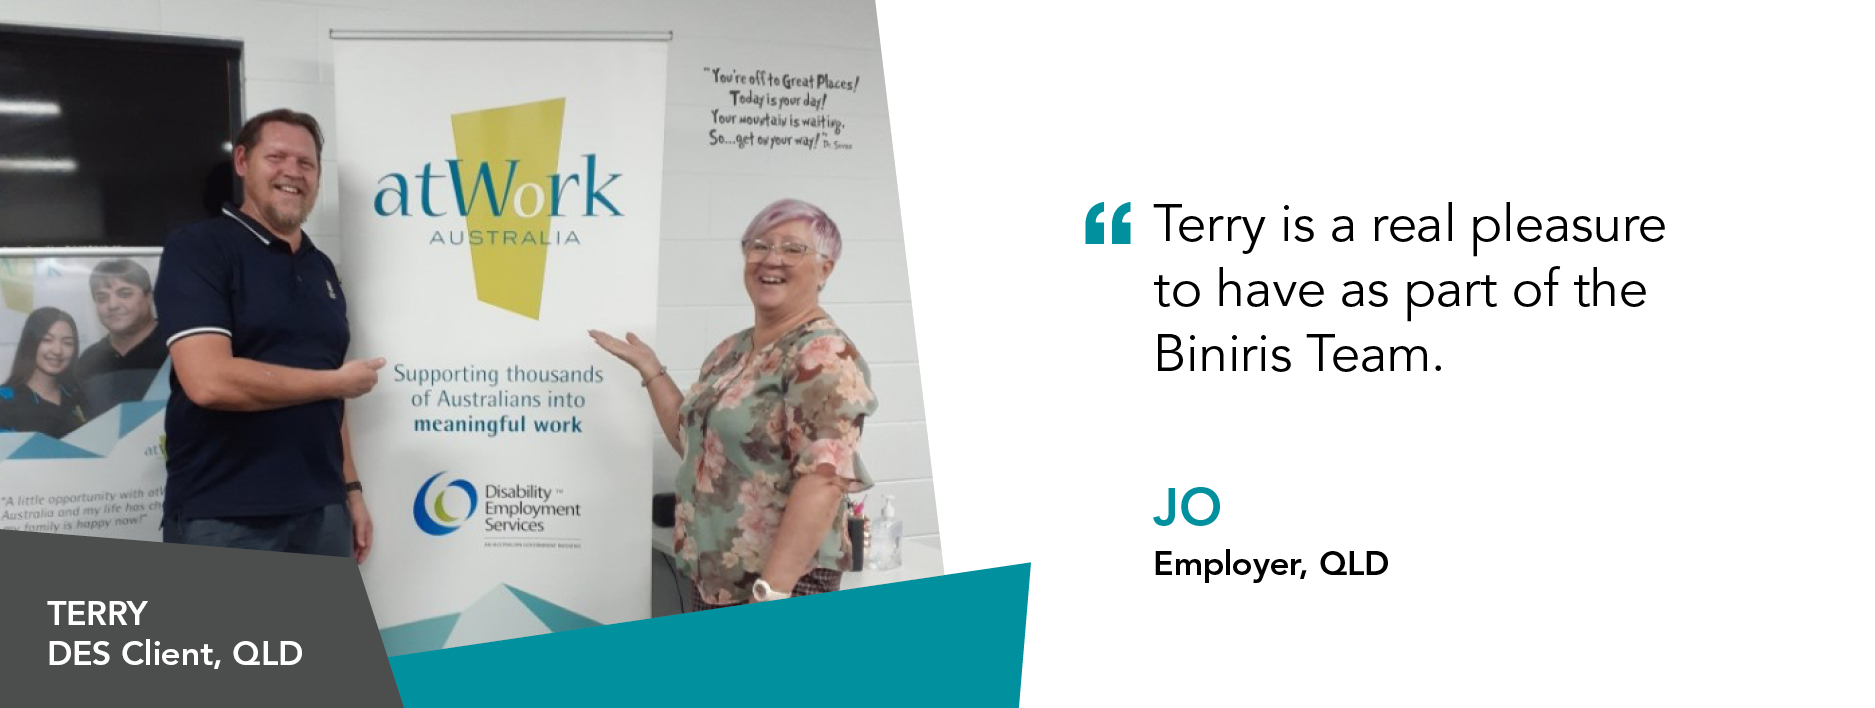 "Terry is a real pleasure to have as part of the Biniris Team." Jo Employer Queensland